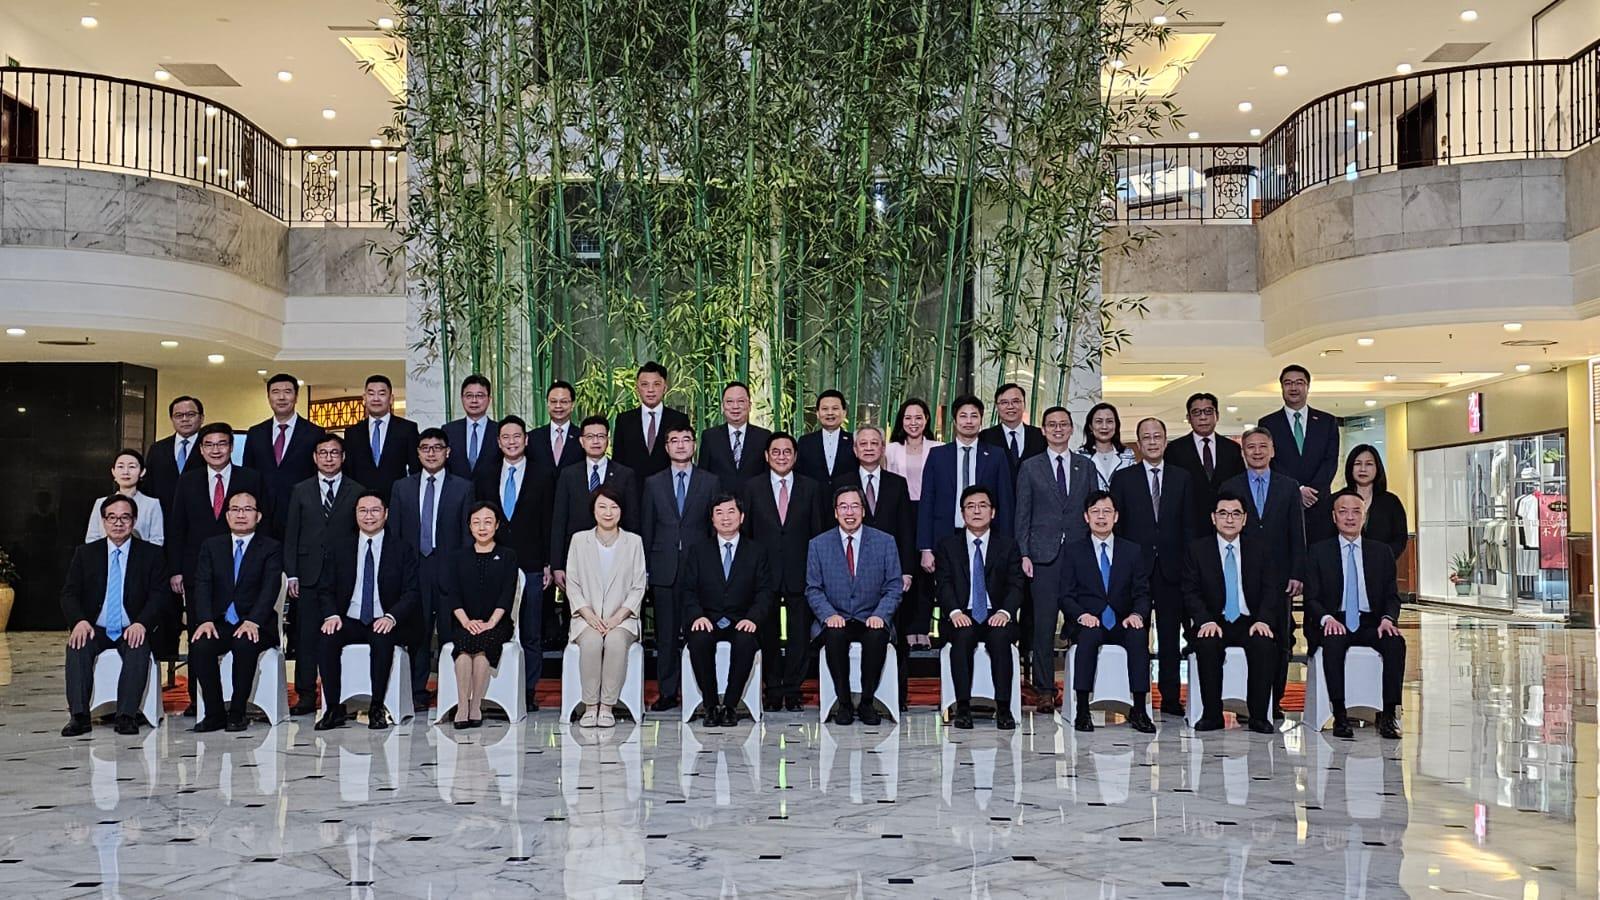 The Legislative Council (LegCo) delegation begins the five-day study visit in Fujian province today (July 15). Photo shows the delegation meets the leaders of the CPC Fujian Provincial Committee and Fujian Provincial People’s Government.